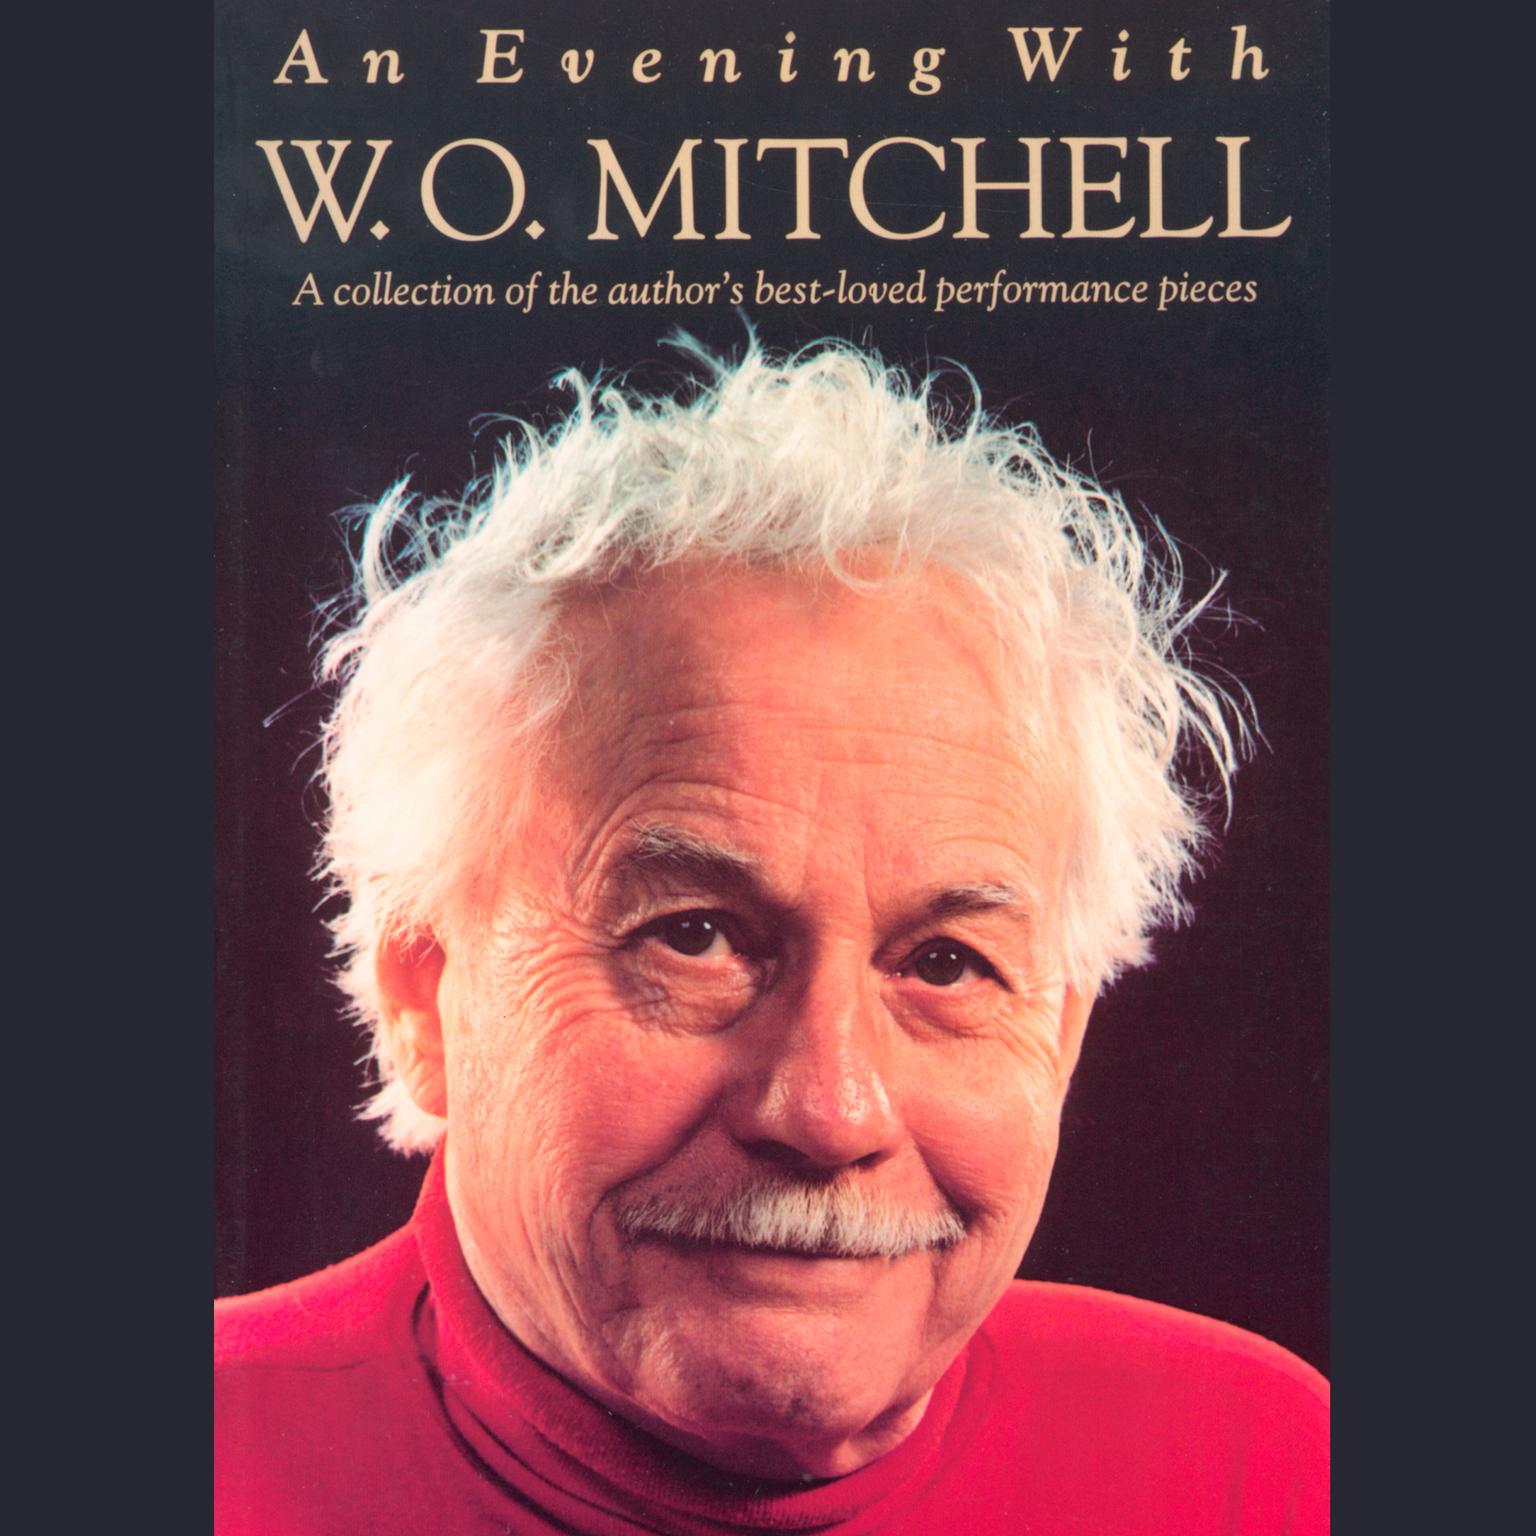 An Evening with W.O. Mitchell (Abridged): A Collection of the Authors Best-Loved Performance Pieces Audiobook, by W. O. Mitchell